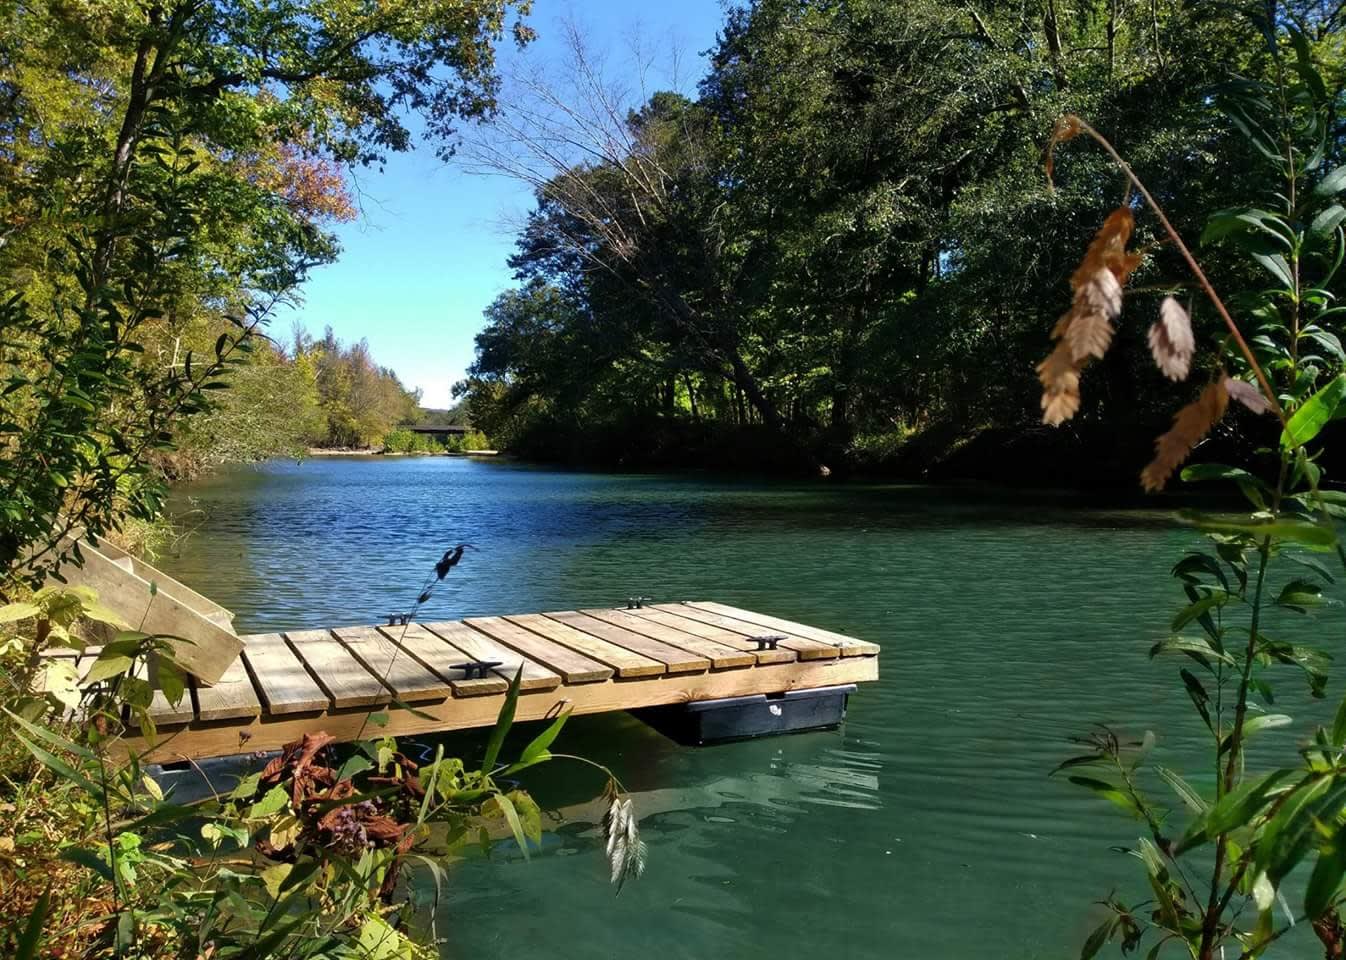 The dock is available all year, except during or just after flooding.  The property extends to both sides of the river for almost 1/3 mile. The water is cold and blue from Jan-April; Cool and clear May-June; Warm, mostly clear but slightly green July-Sept 